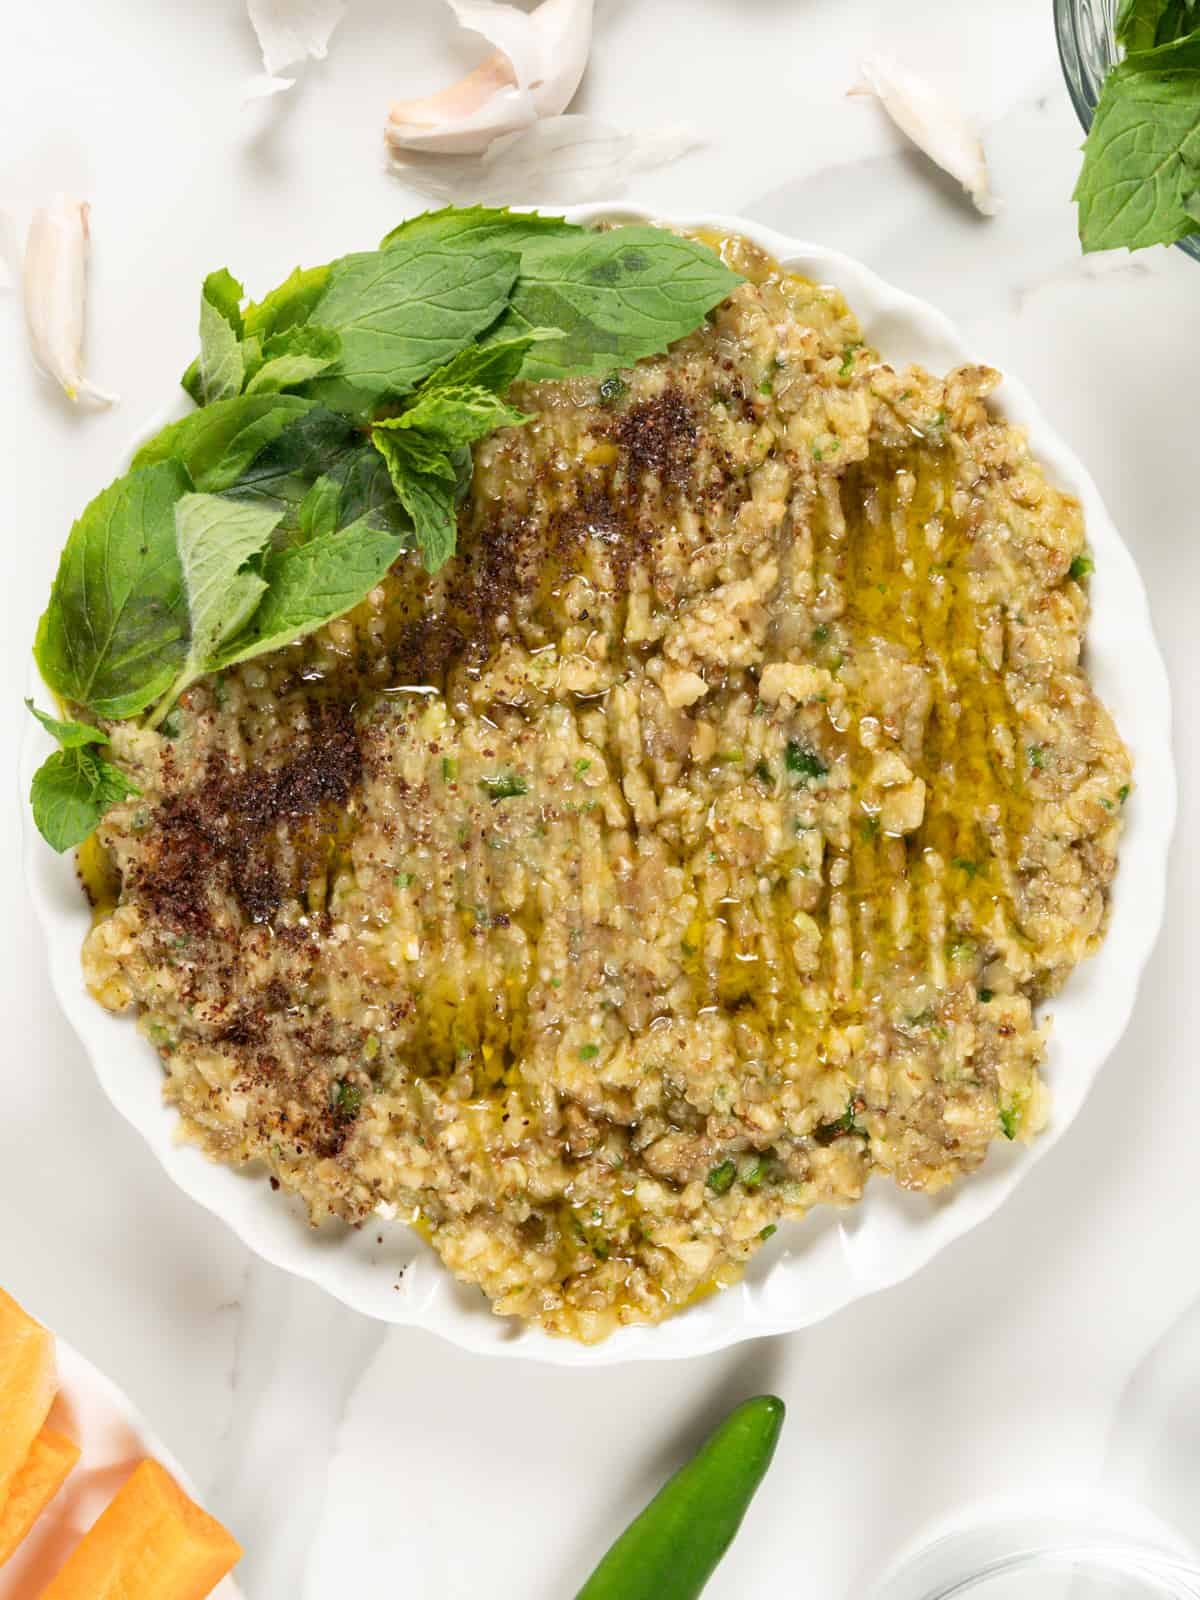 Delicious Moutabal (Eggplant Dip Without Tahini)